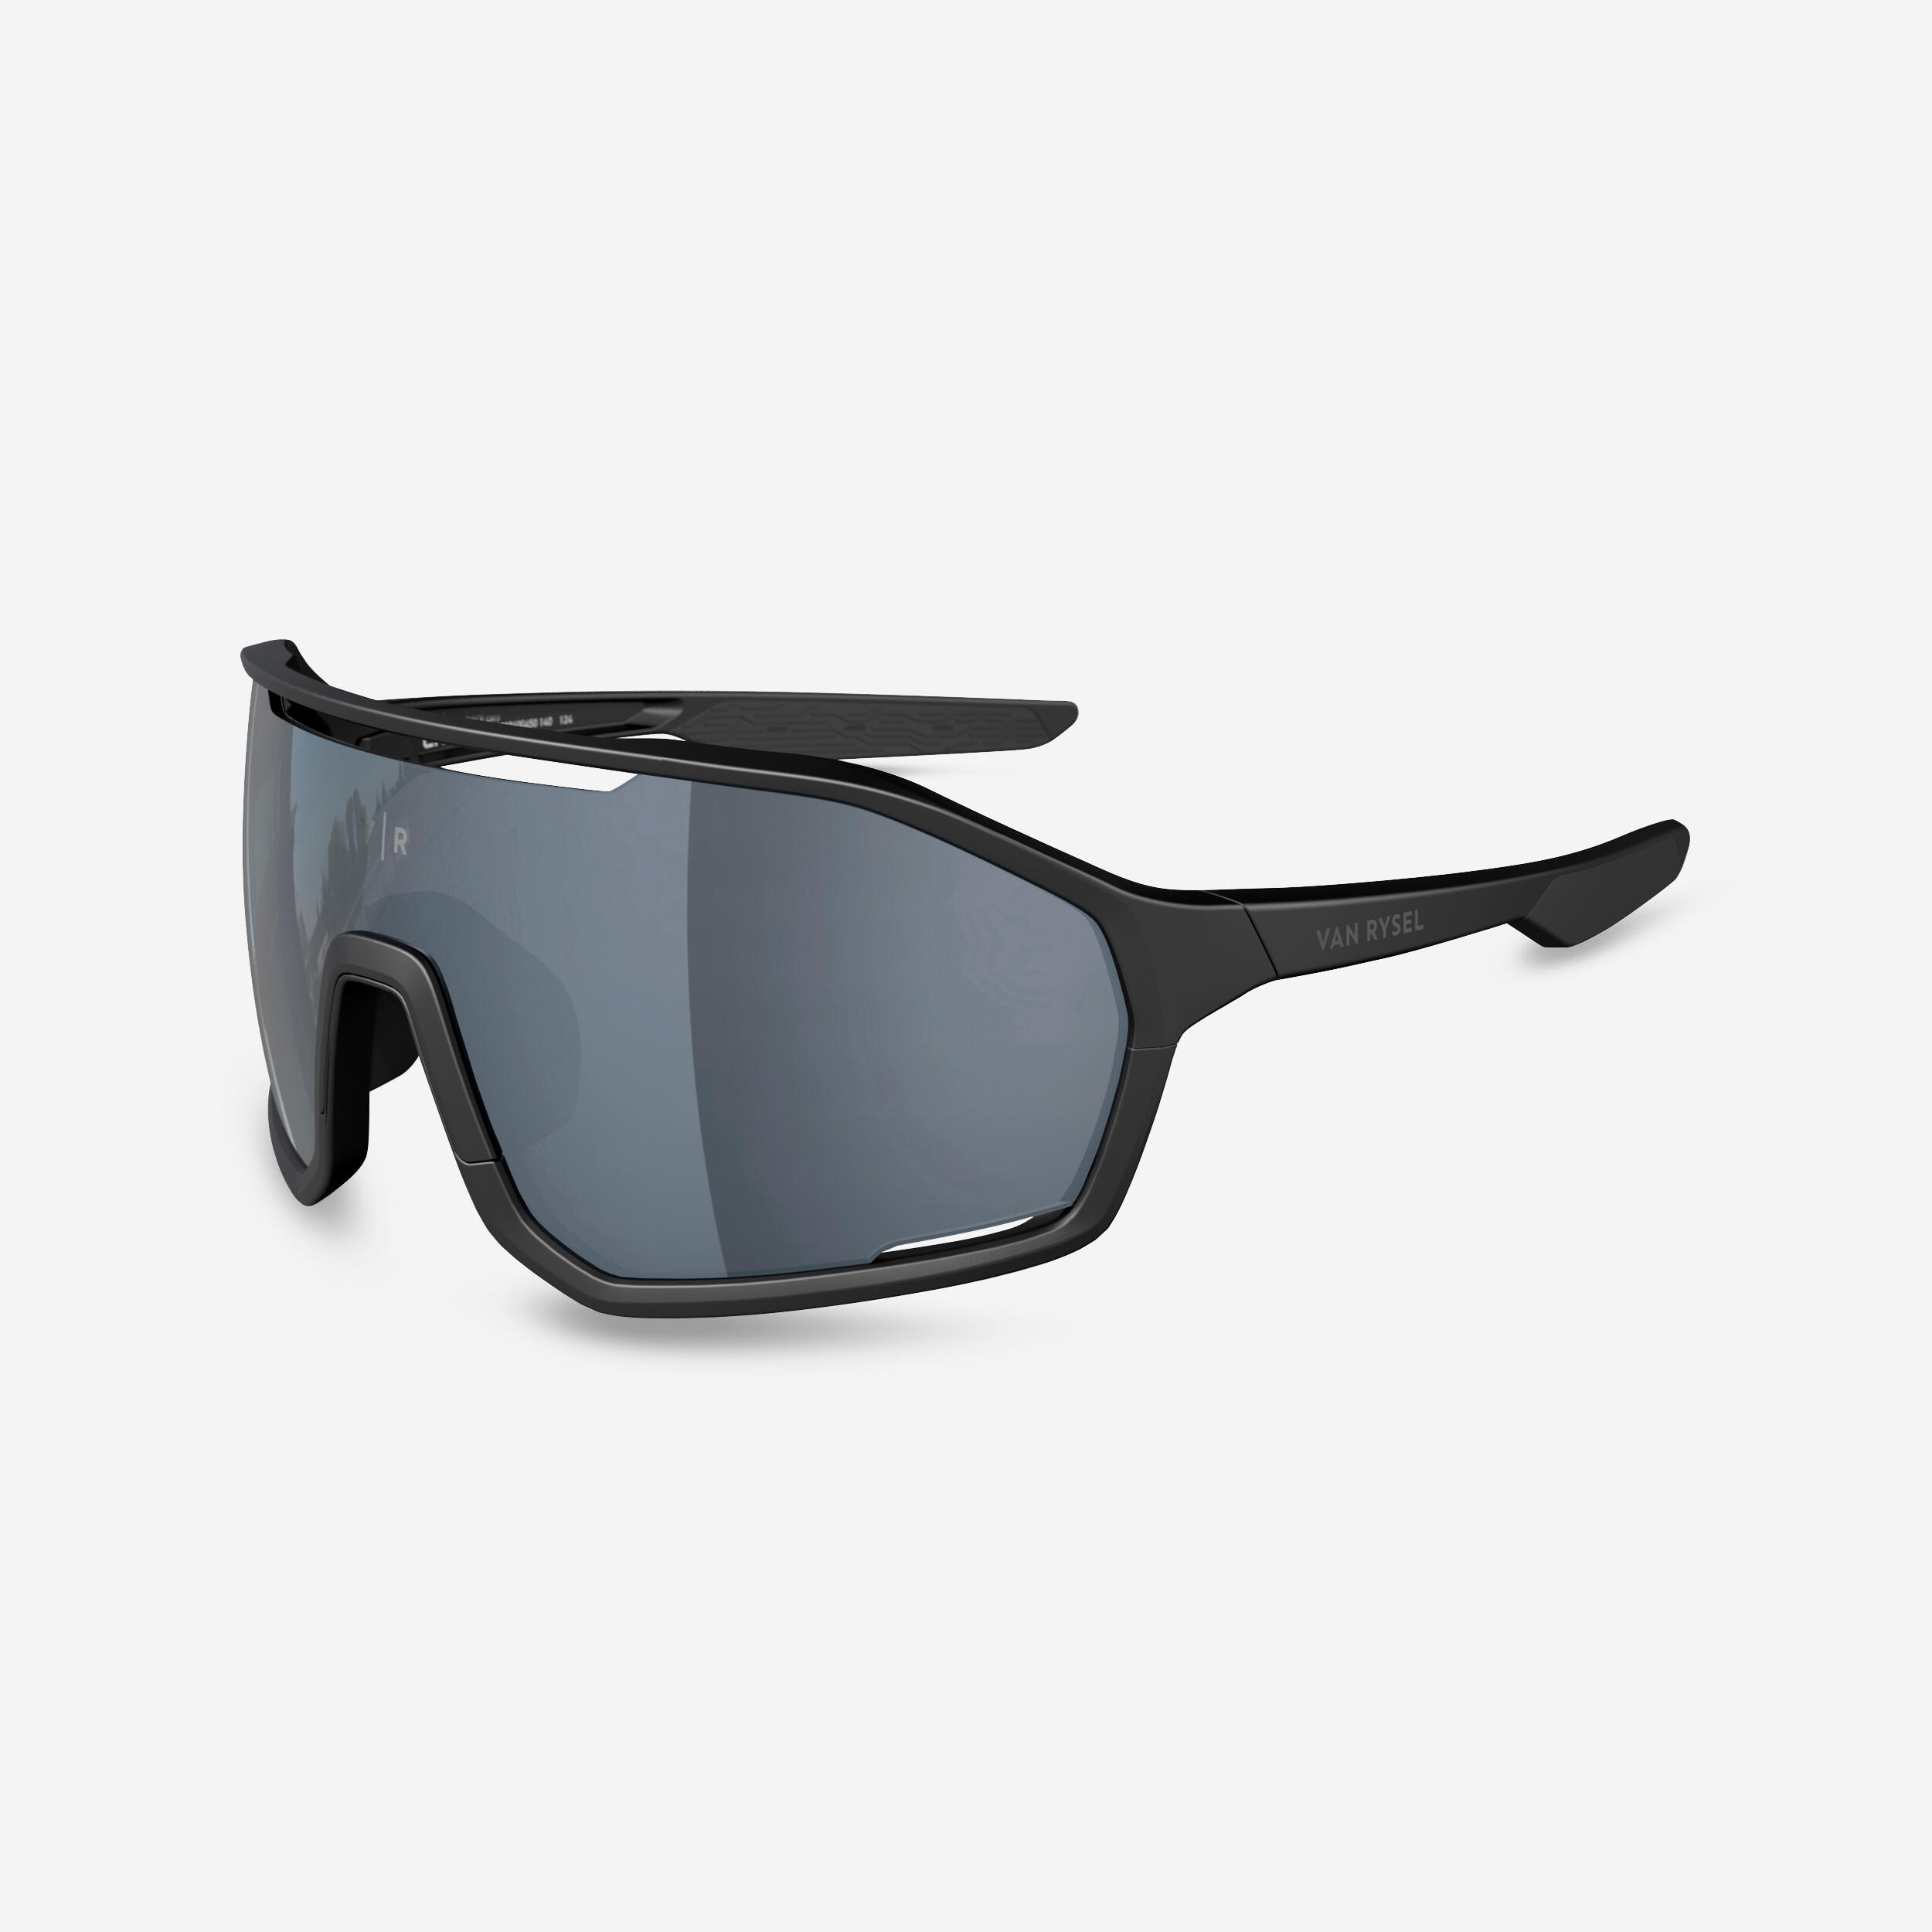 Adult Category 3 Cycling Sunglasses Perf 500 - Black 1/7